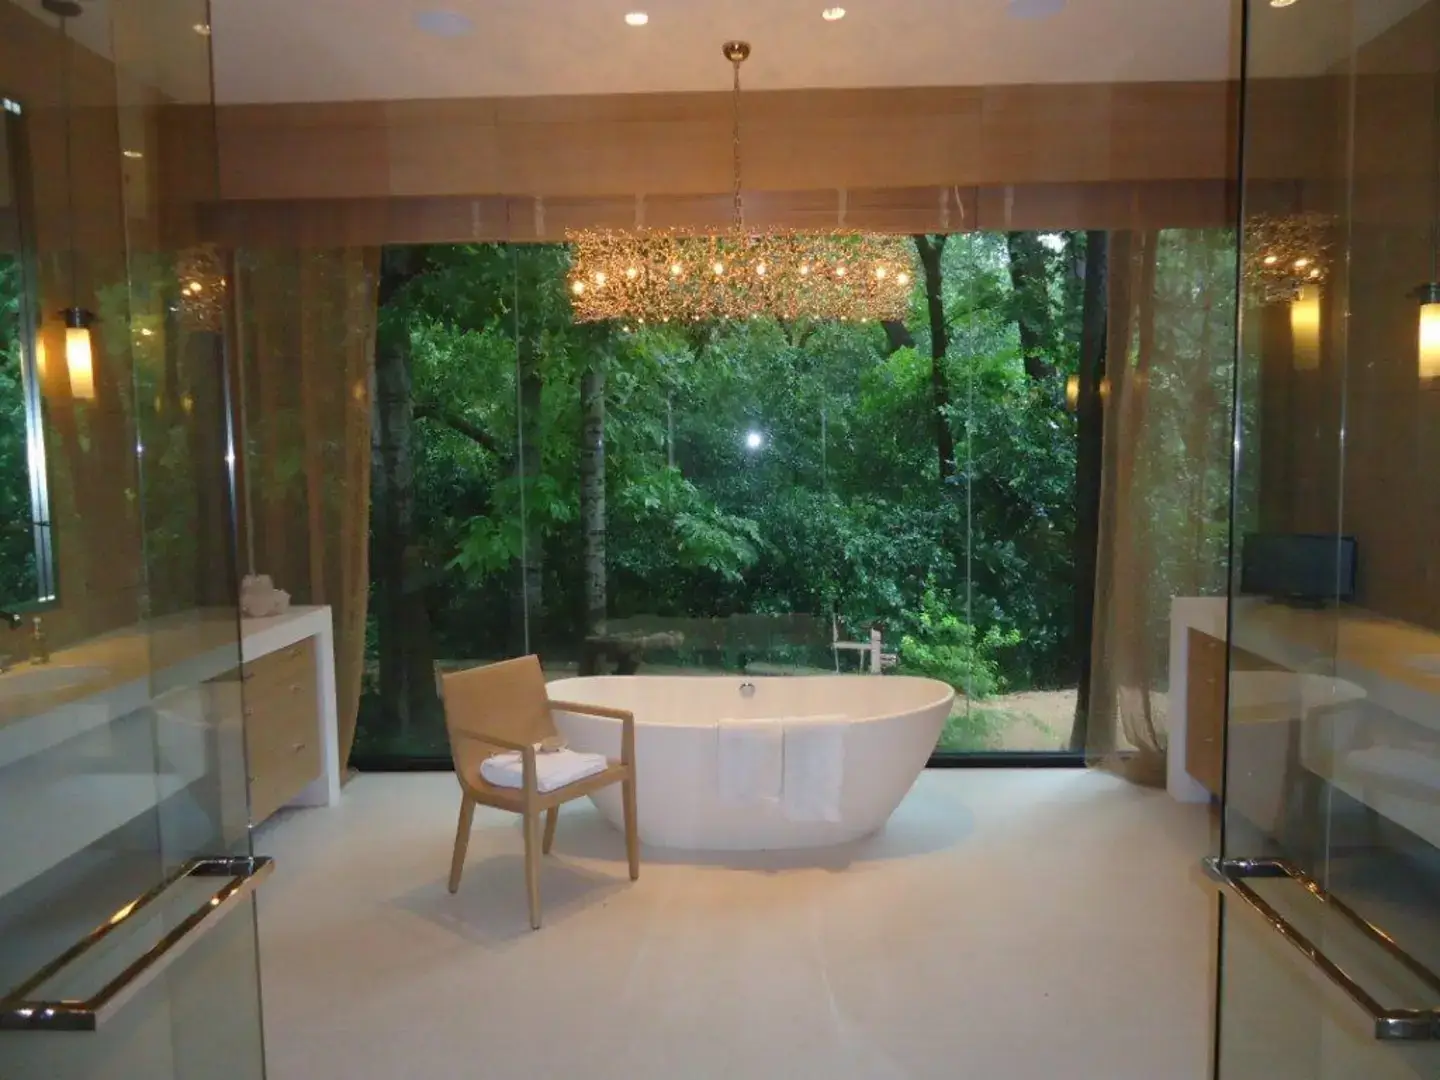 Modern bathroom with wooden blinds and custom drapery to provide privacy.